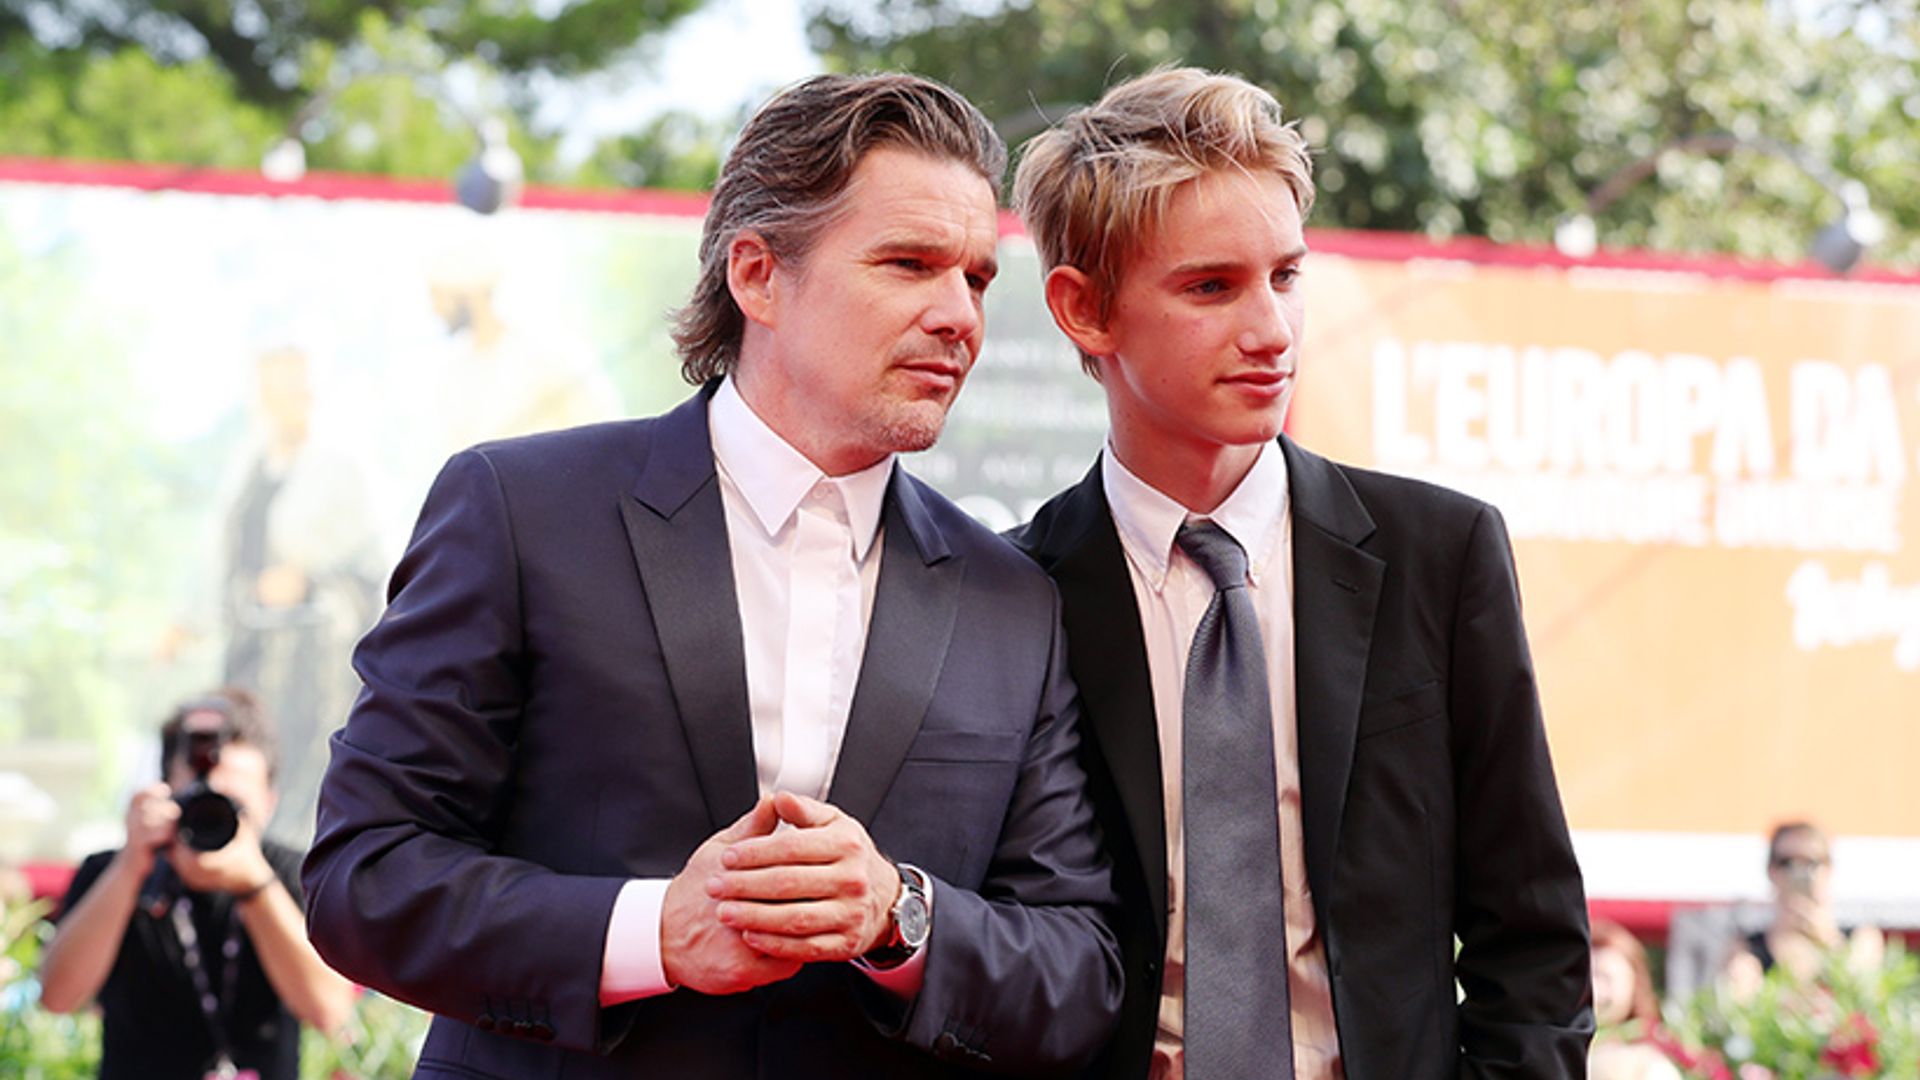 Ethan Hawke makes rare appearance with son Levon at Venice Film Festival